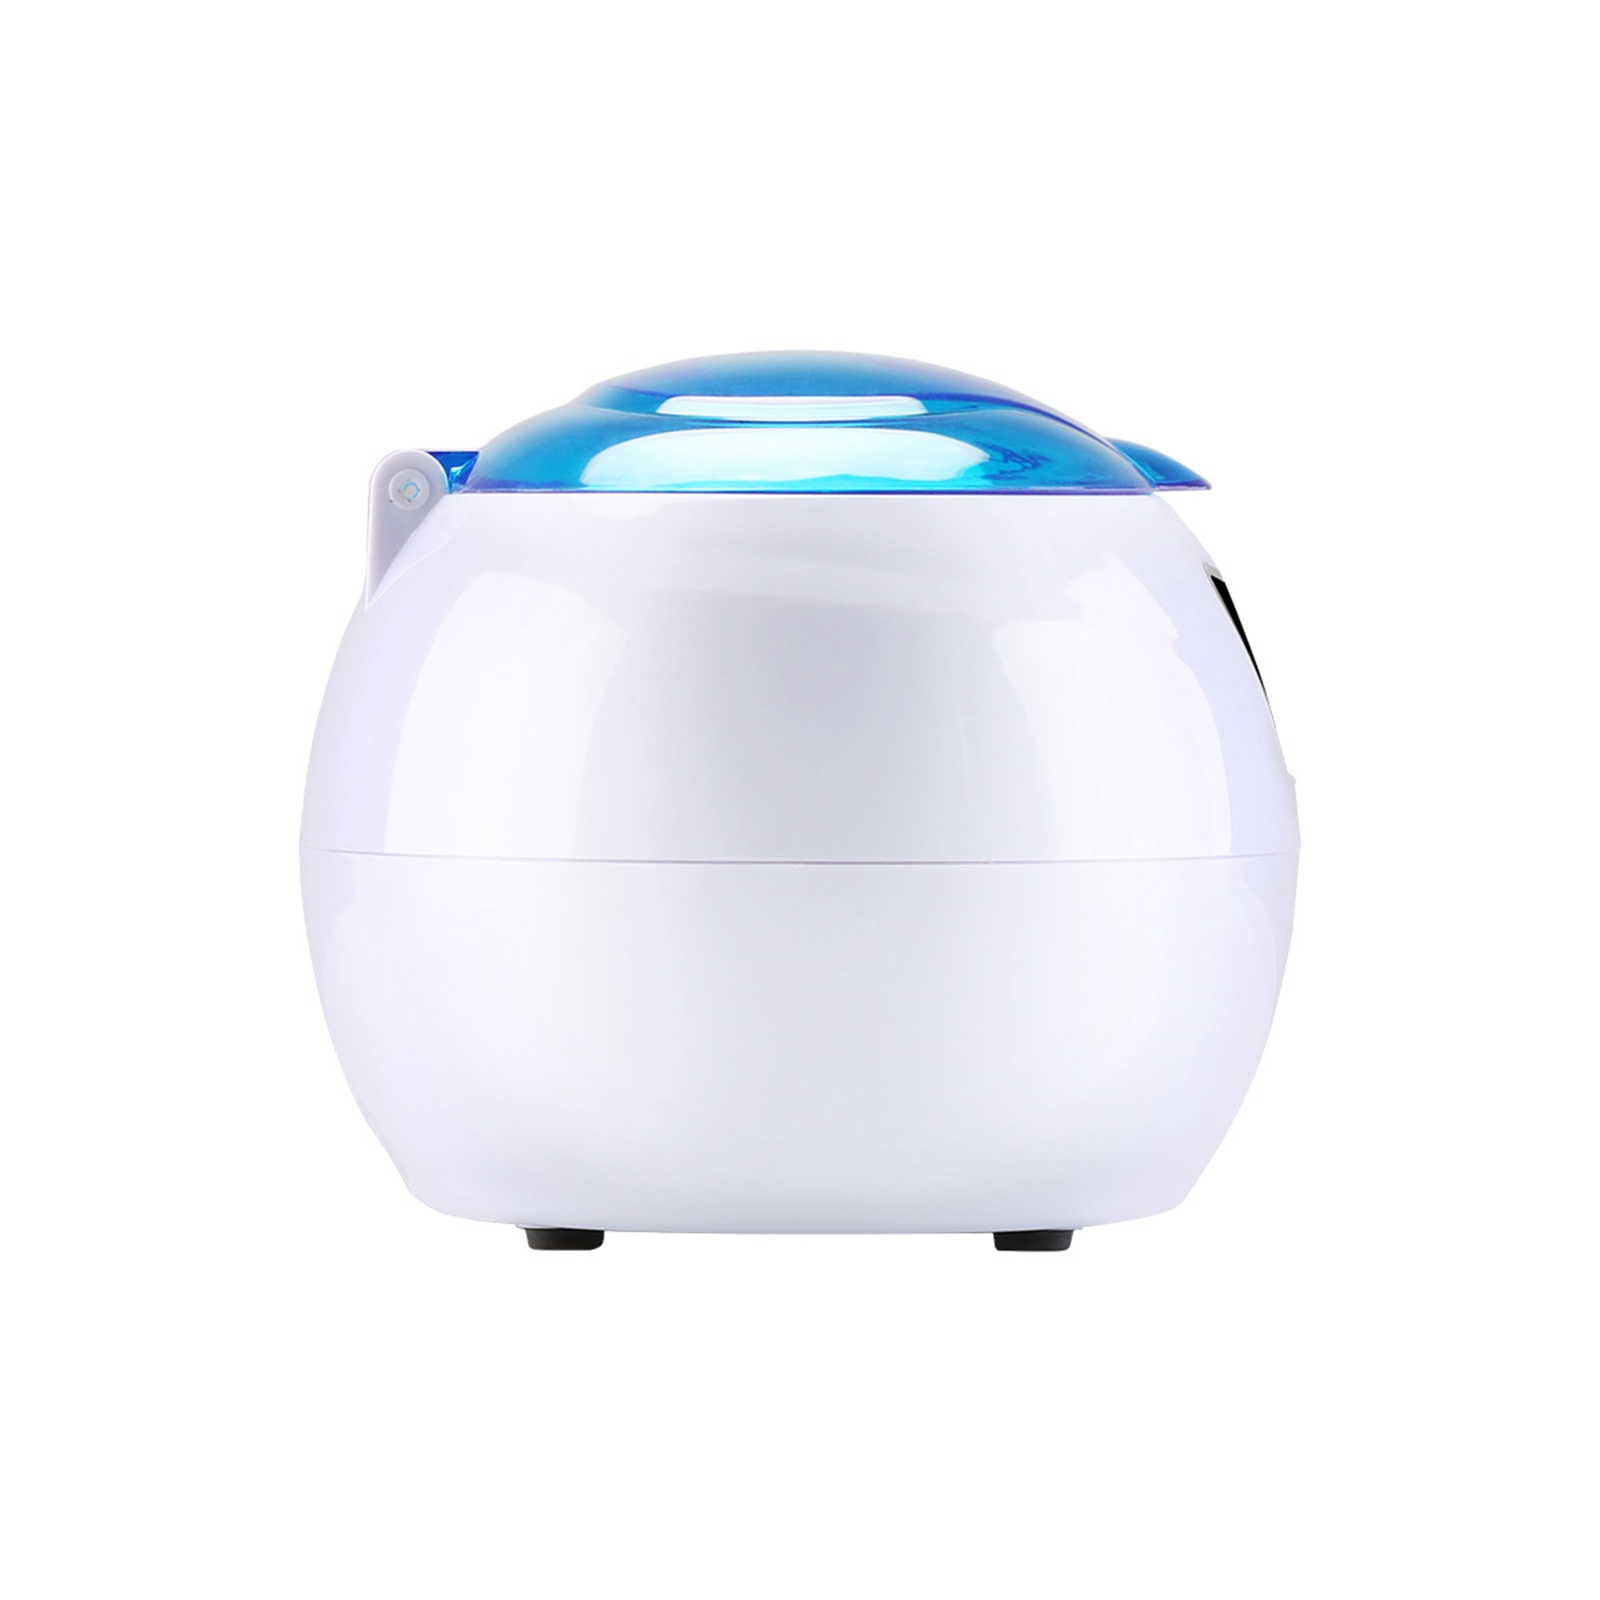 orthodontic tooth braces Ultrasonic cleaner